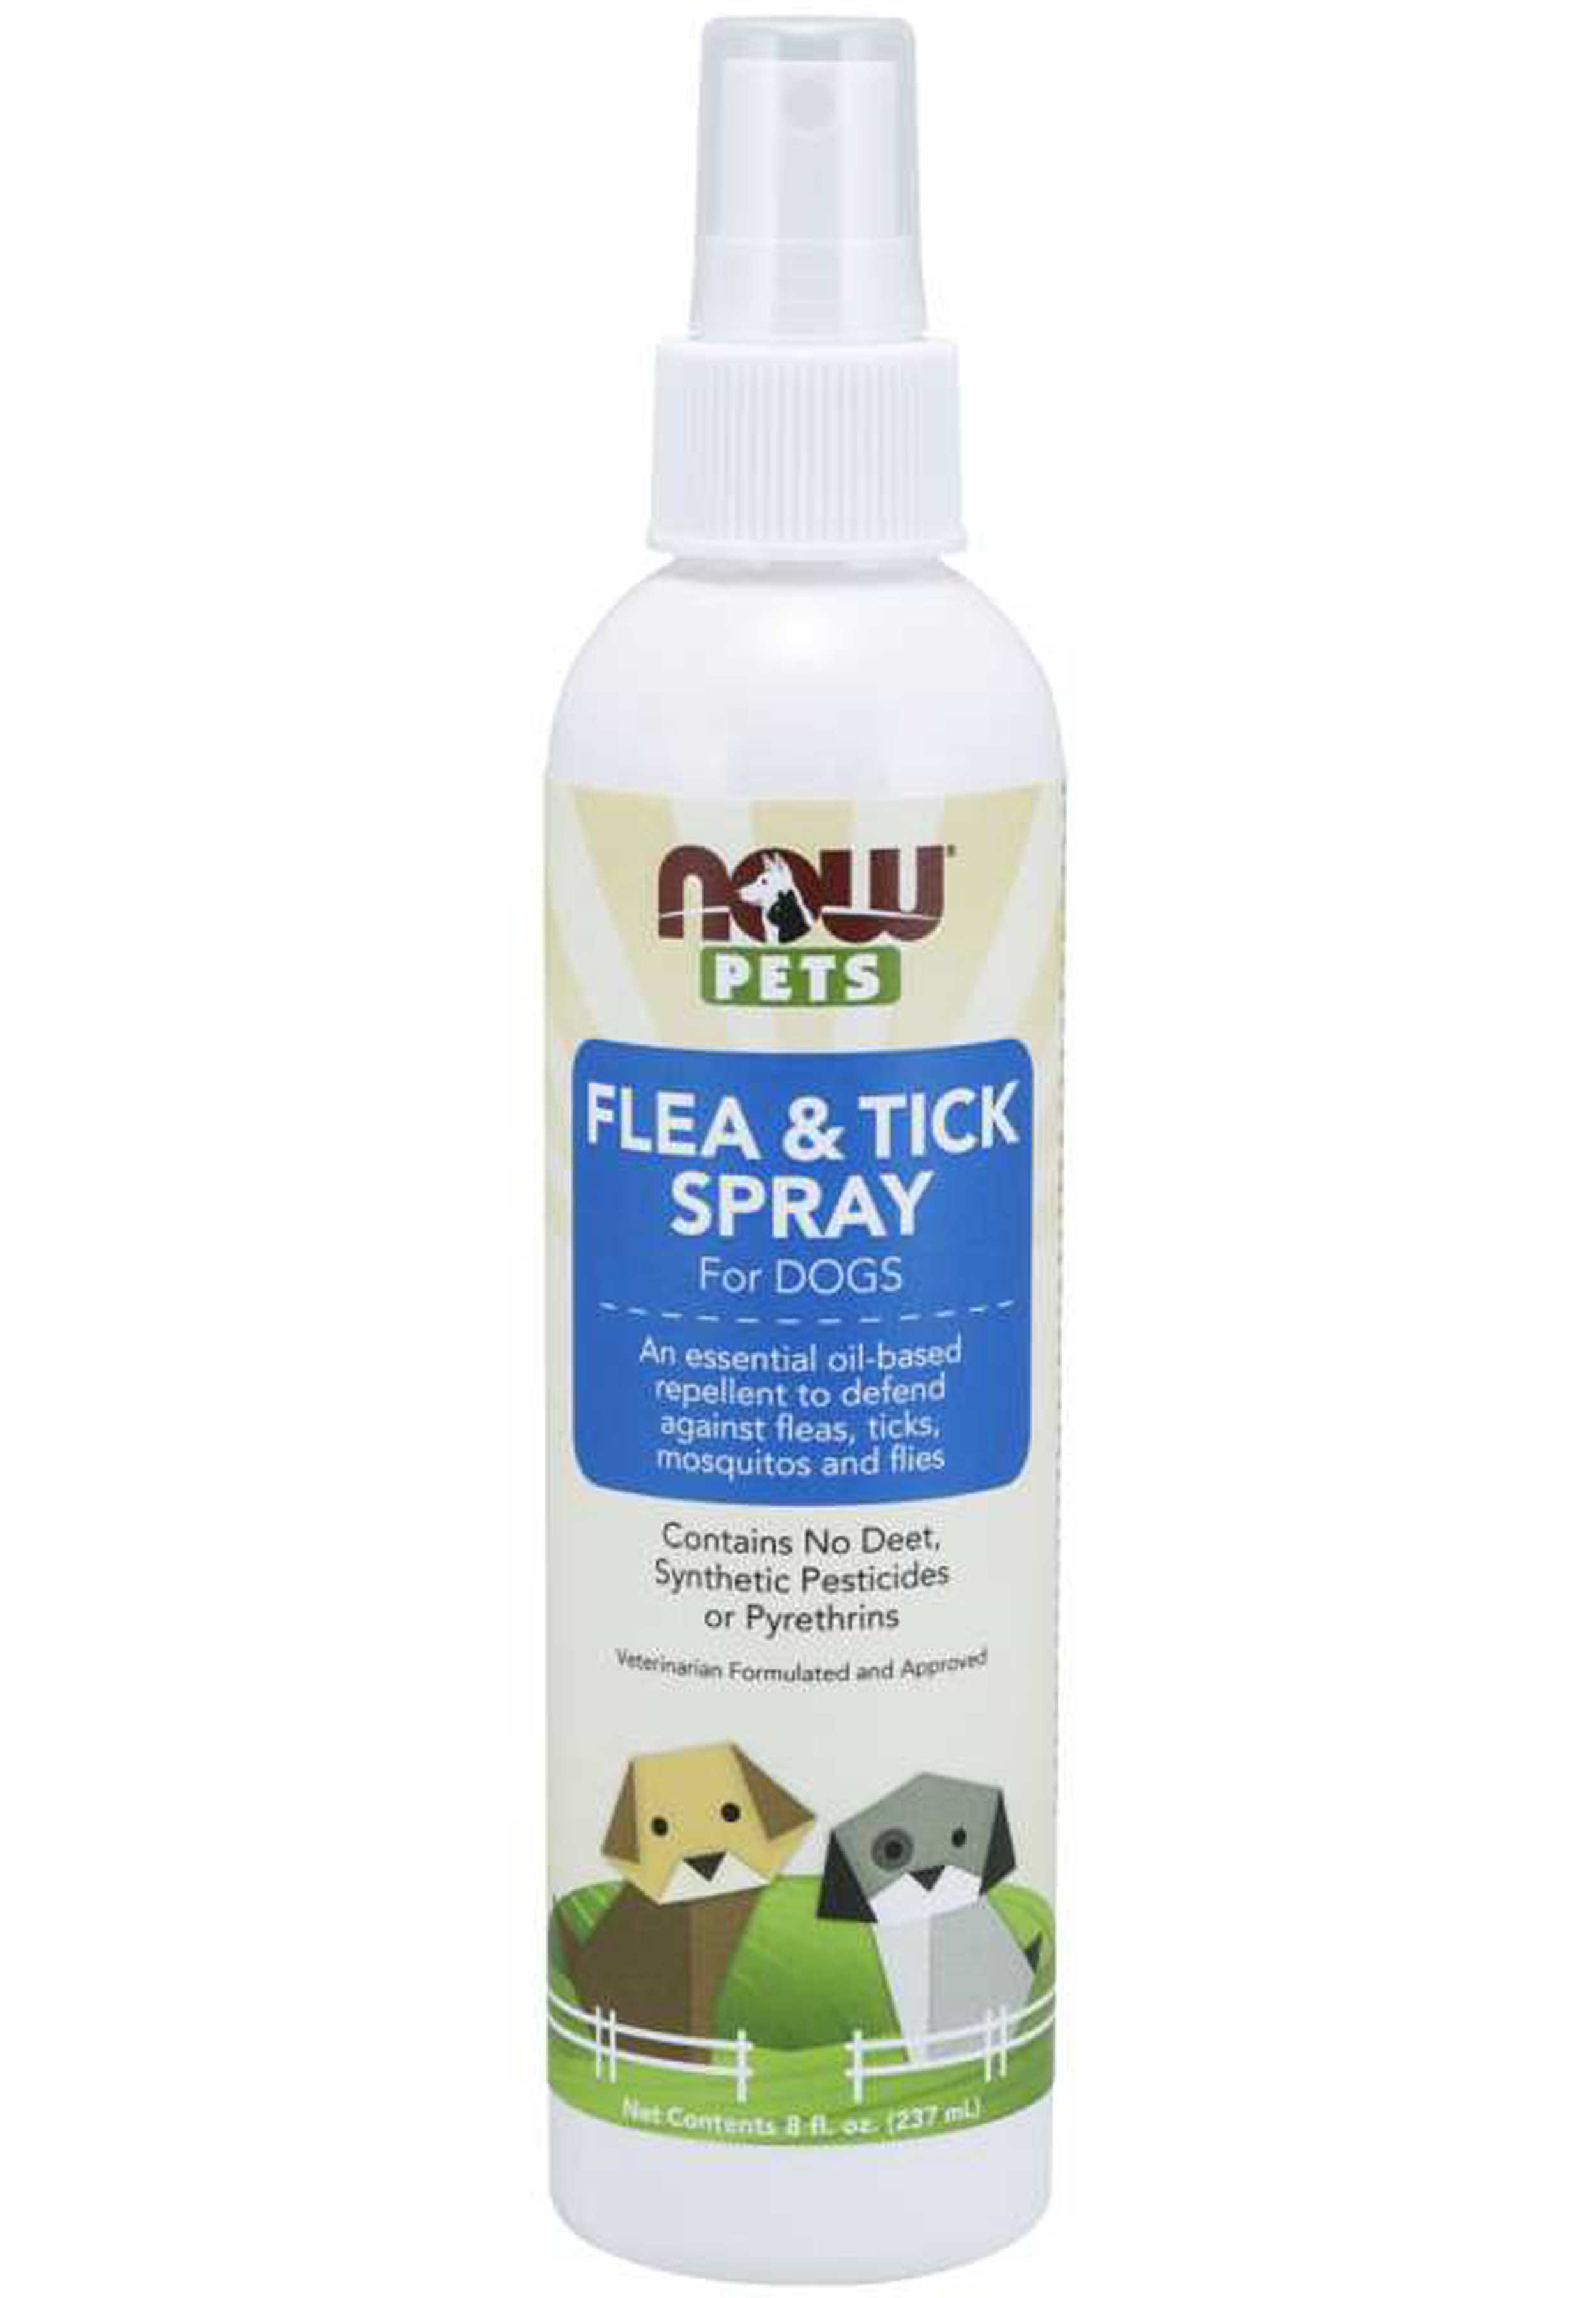 NOW Pets Flea & Tick Spray for Dogs